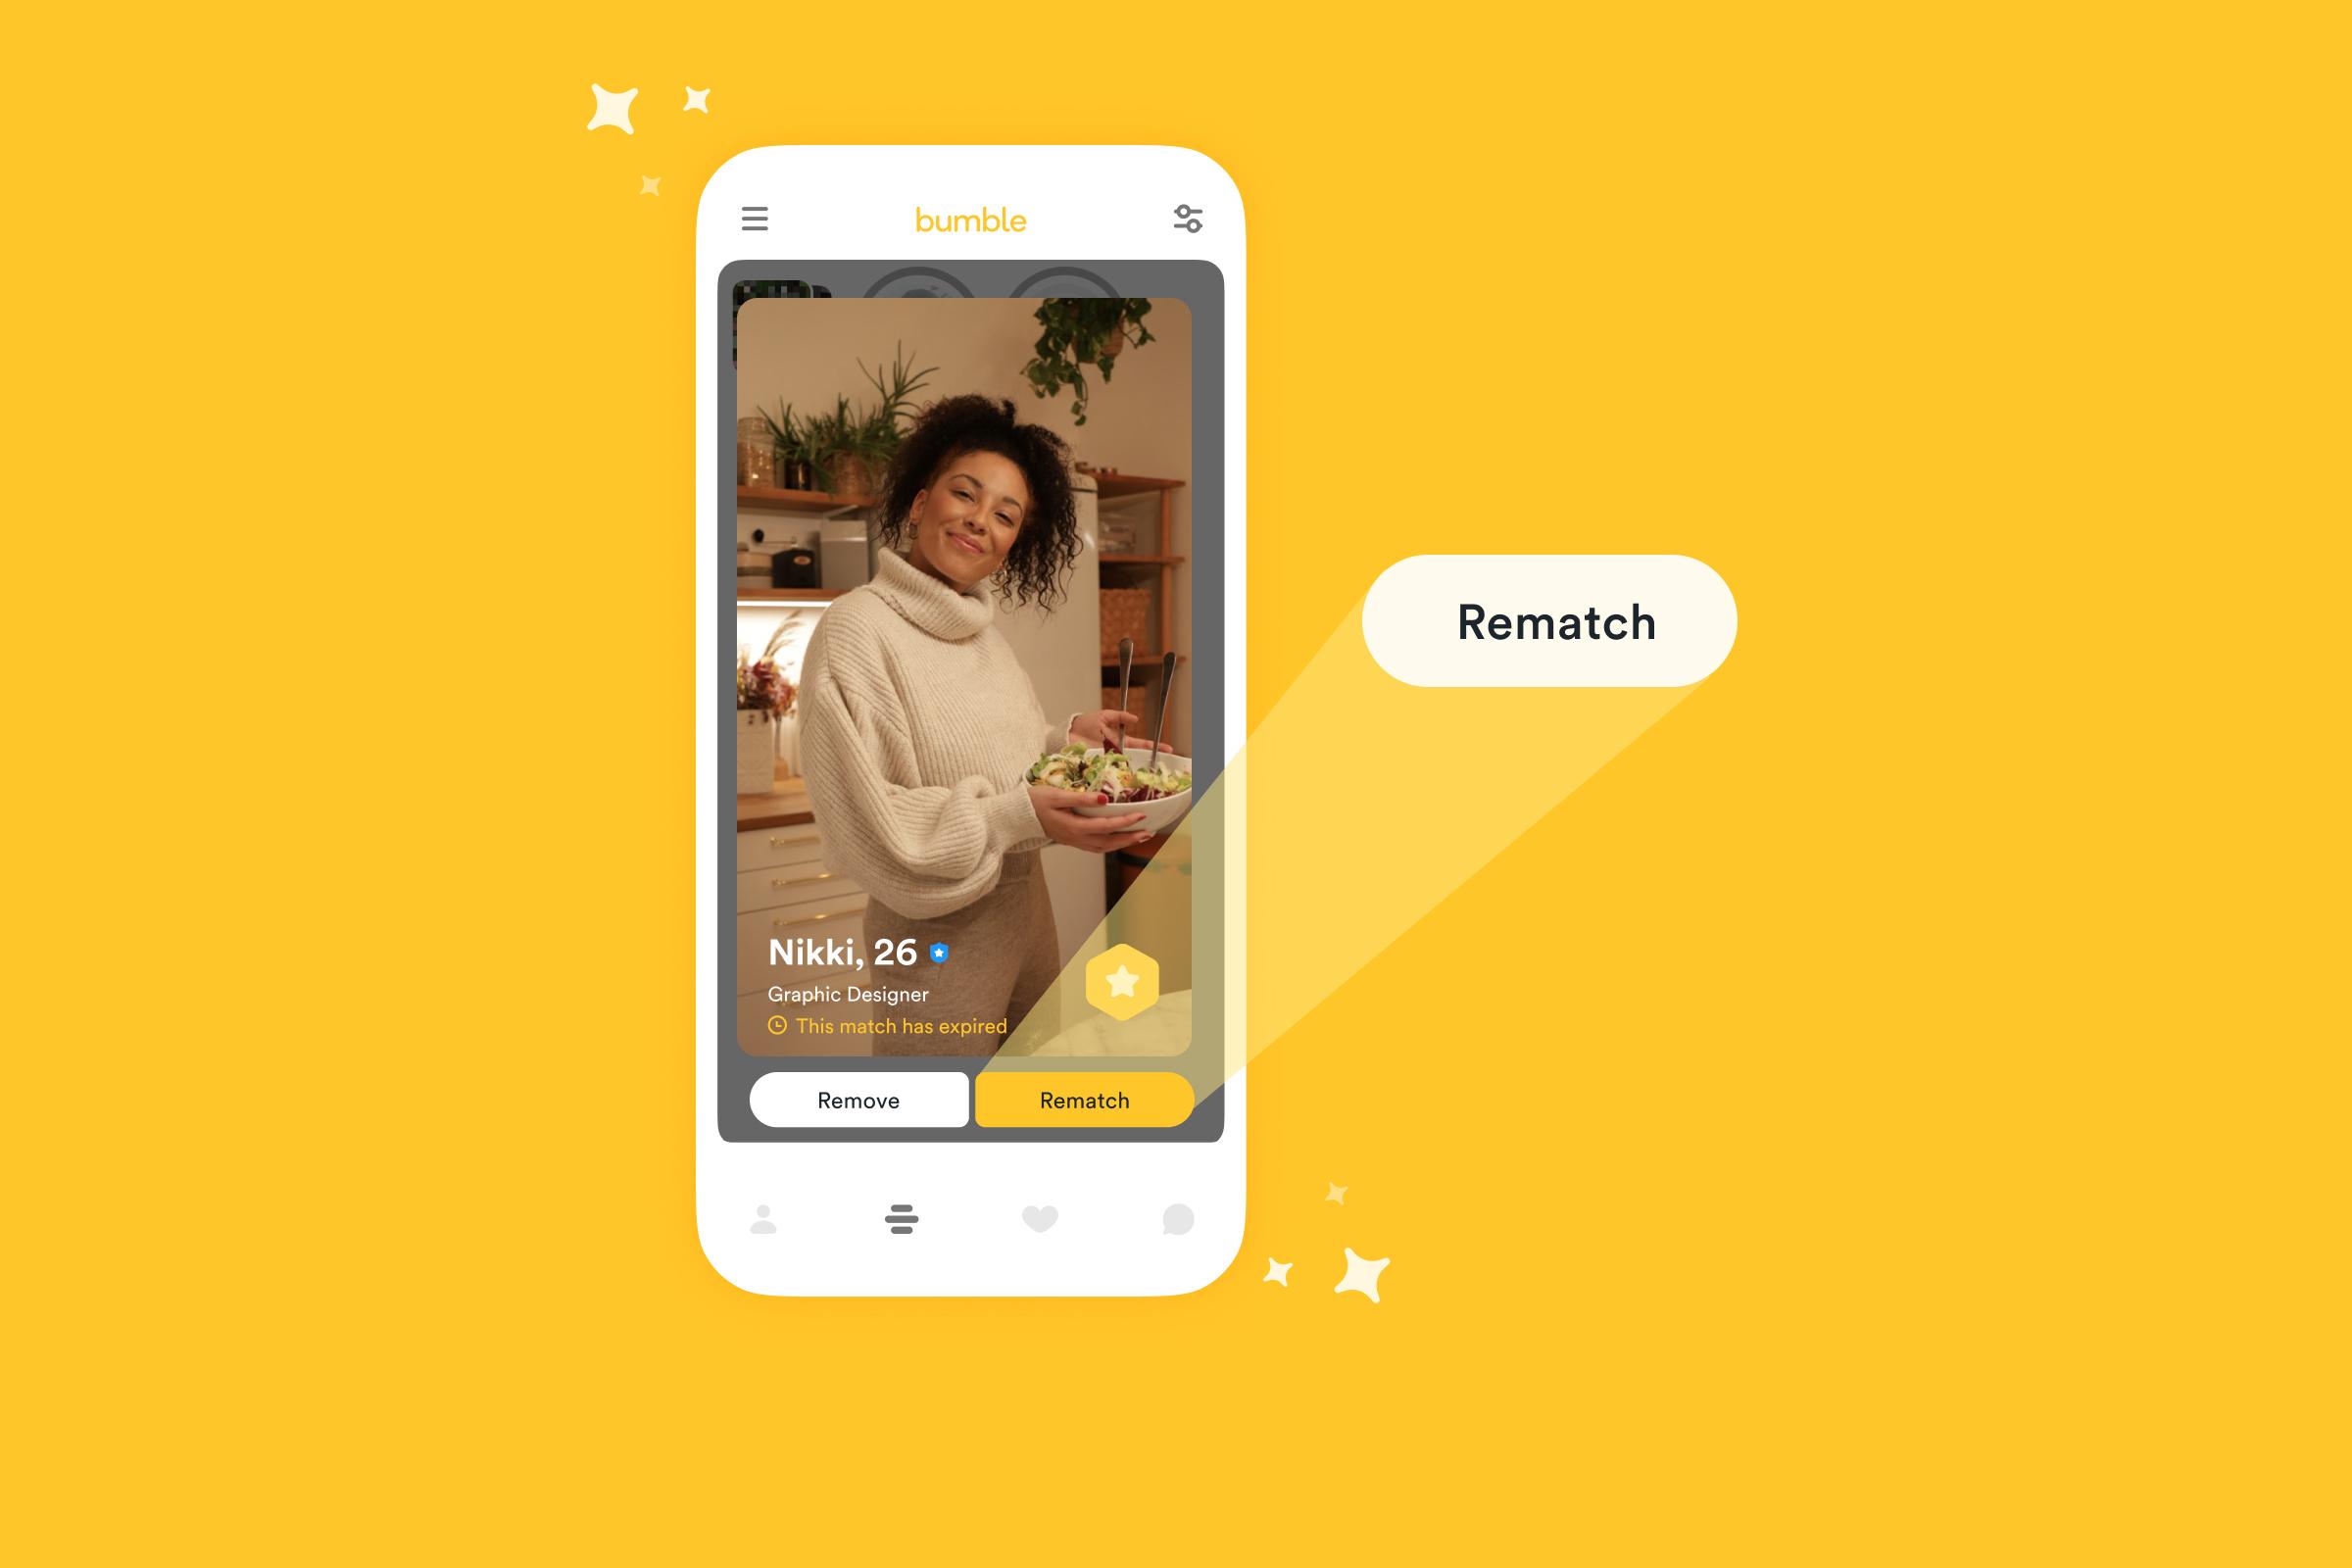 Want to Rematch on Bumble? Here’s How